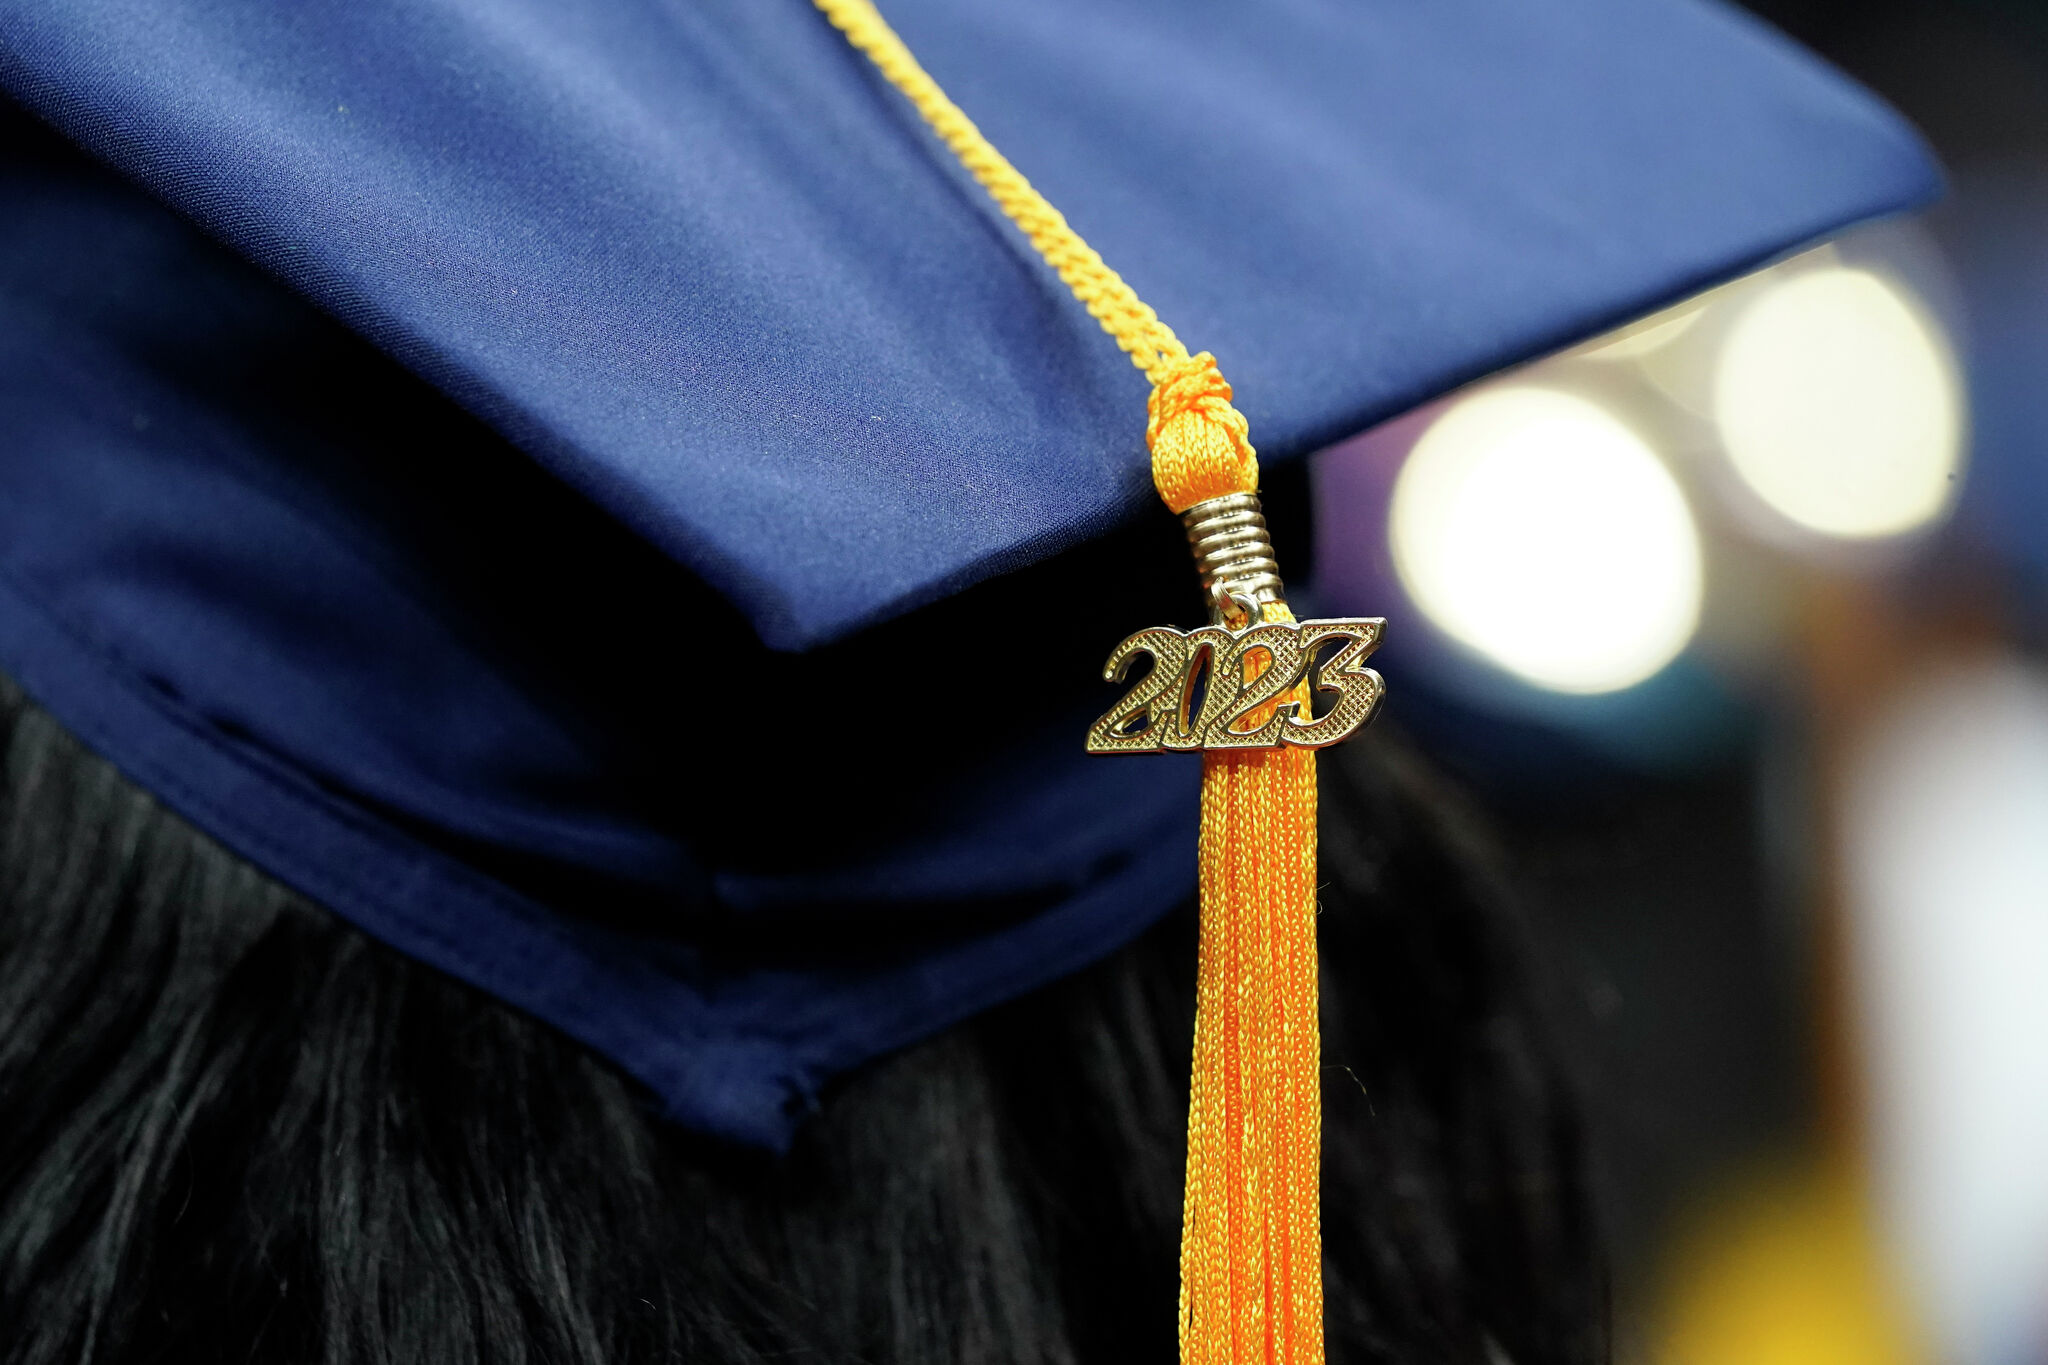 Financial tips for new college grads